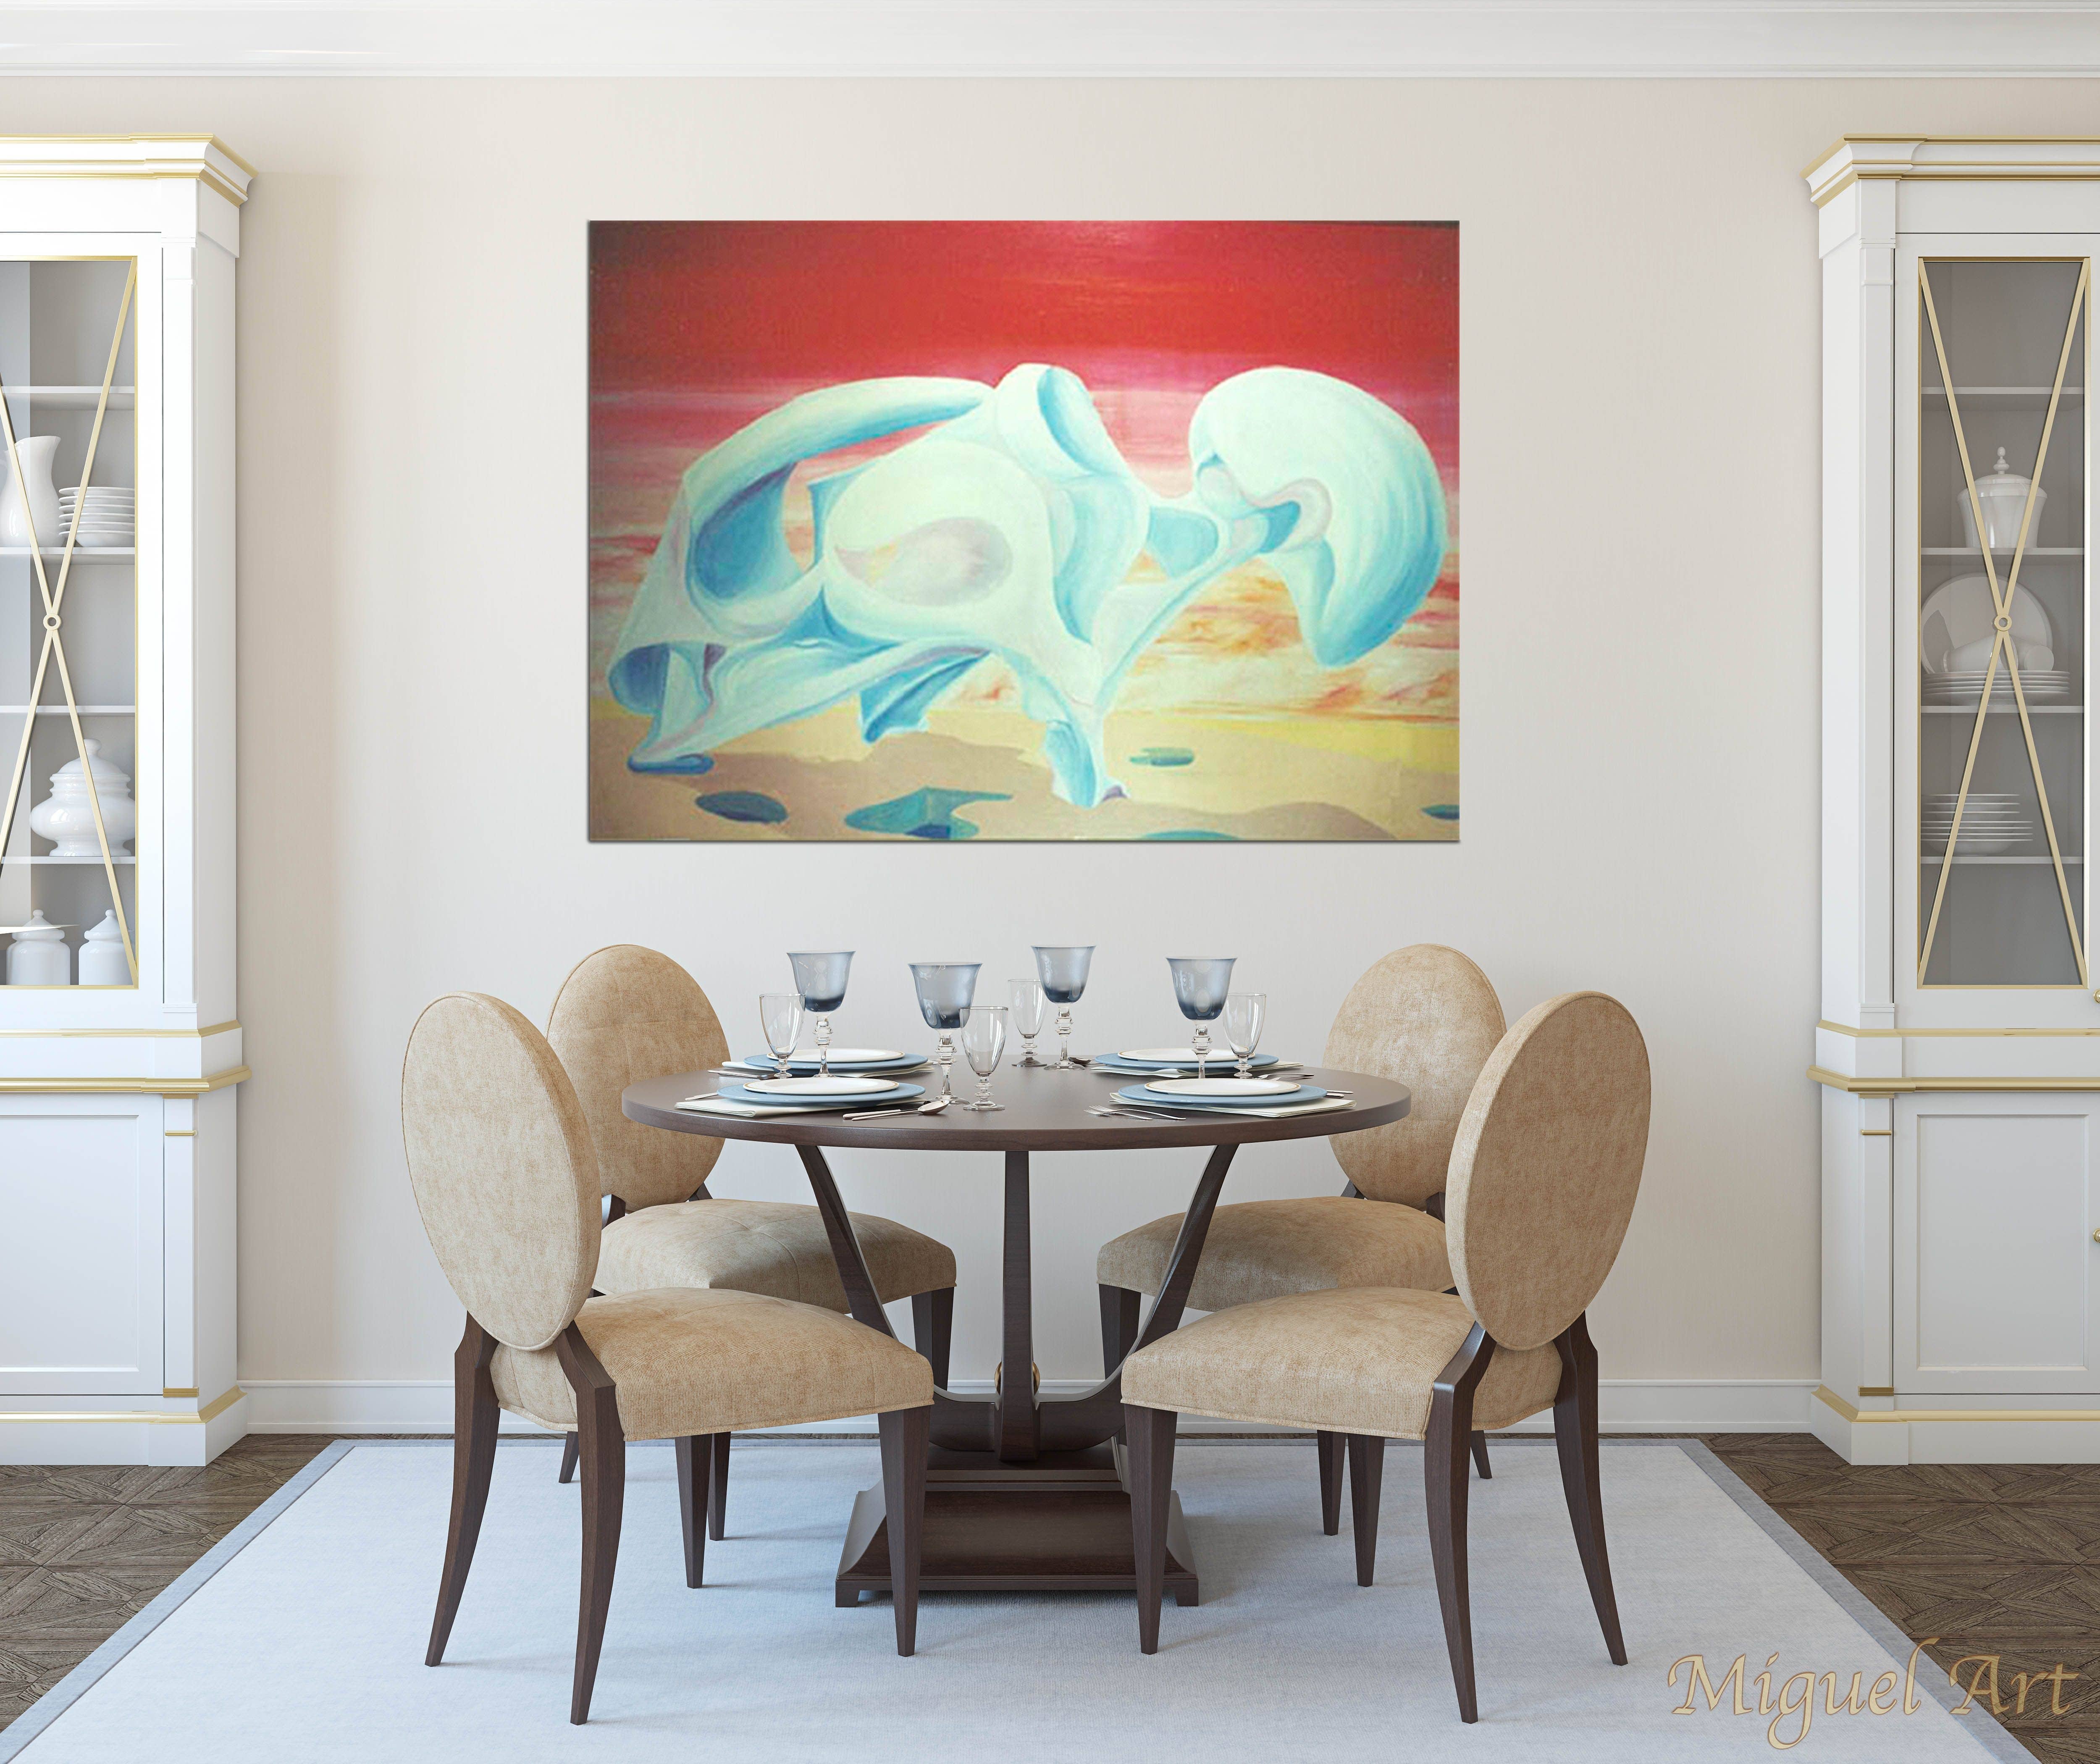 Painting of Diamond displayed in a dining room on a cream wall